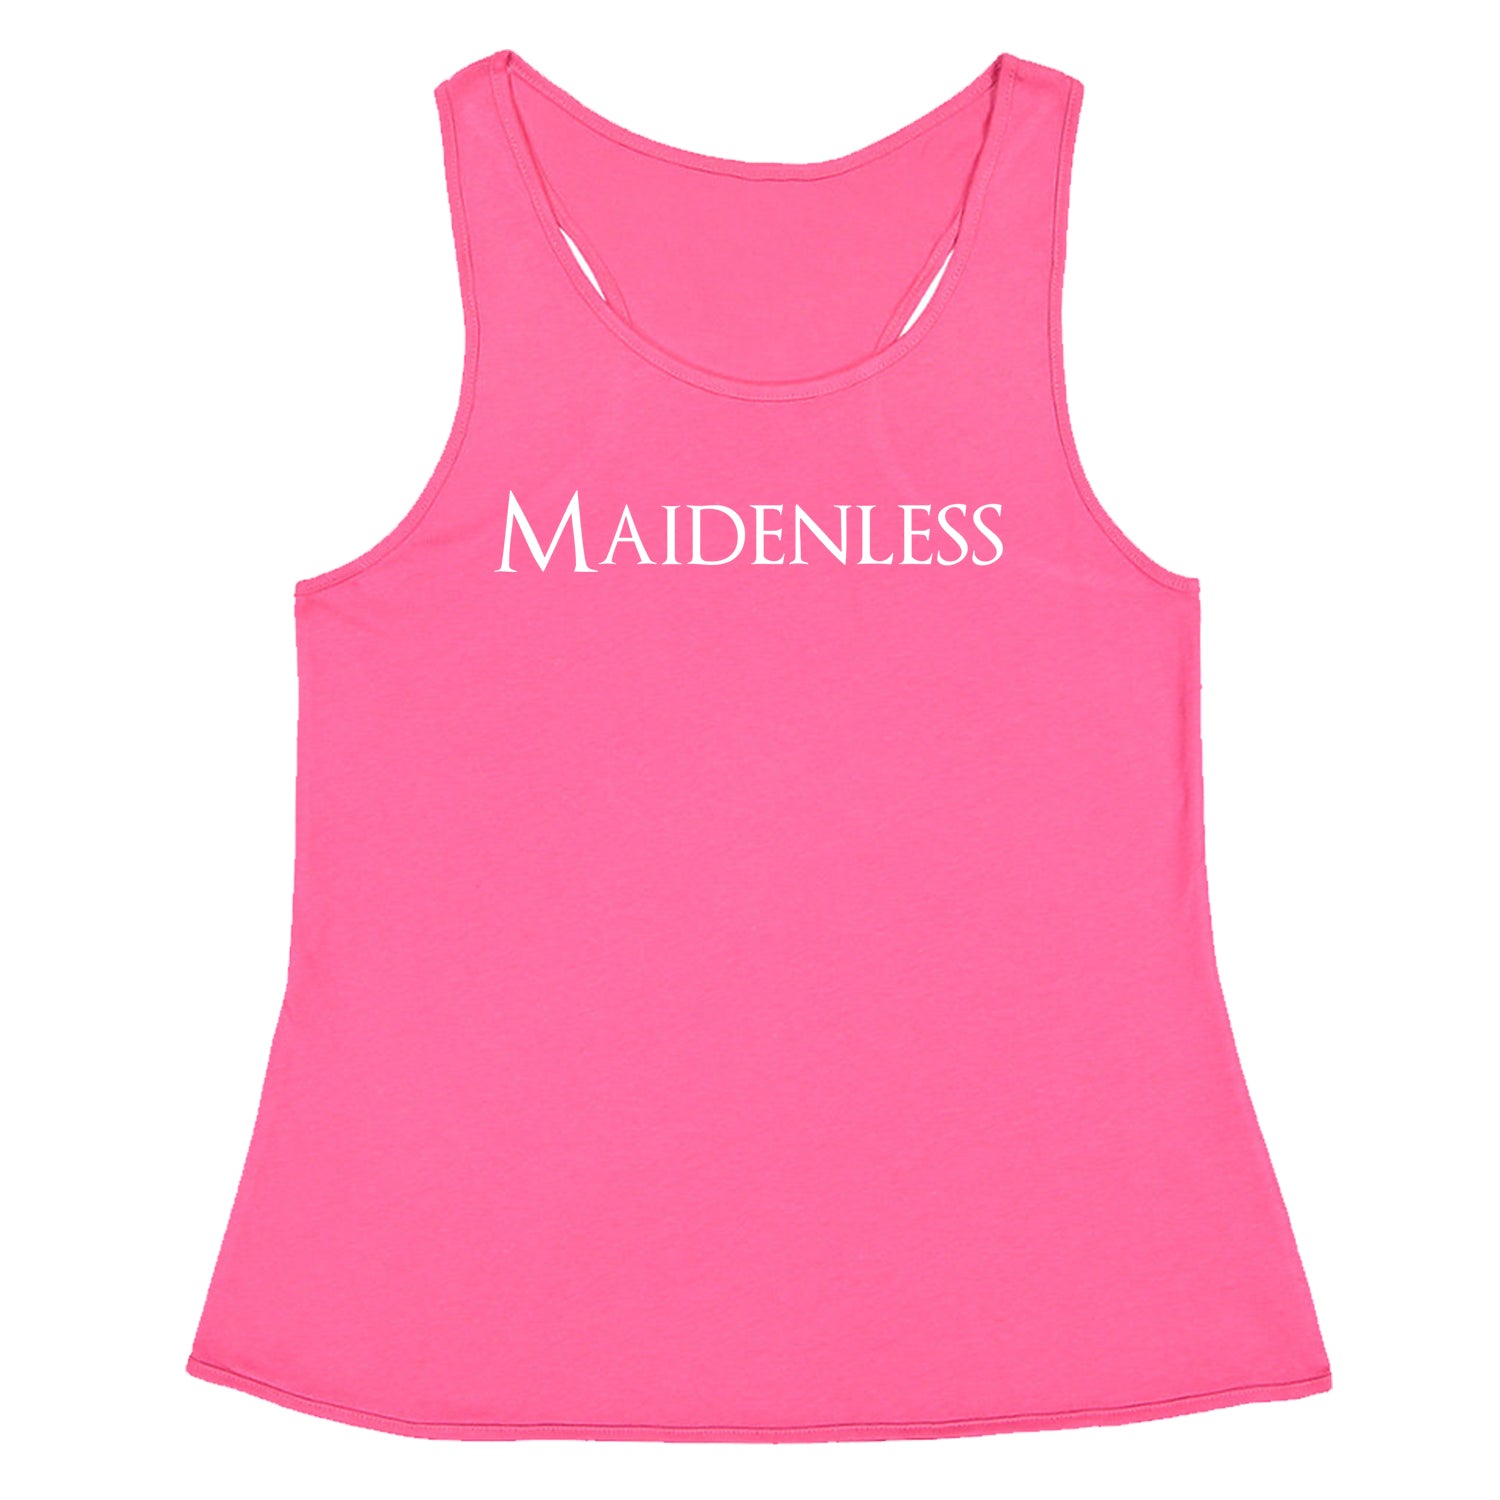 Maidenless Racerback Tank Top for Women elden, game, video by Expression Tees